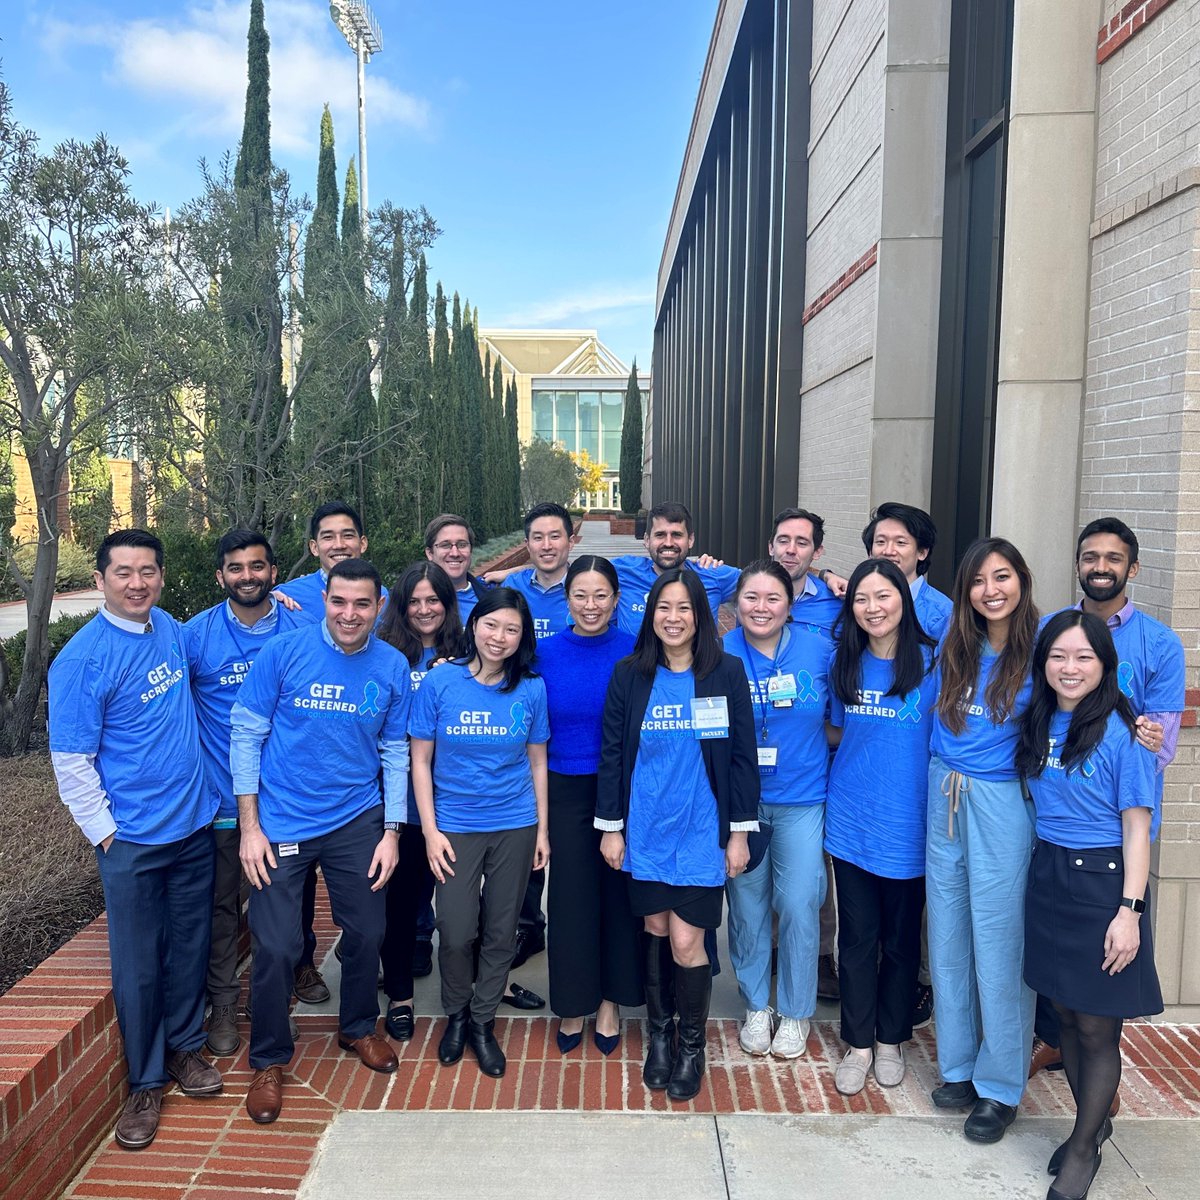 Love our #GIFellows! And💙that they come together every year at our #UCLAGI Mellinkoff Symposium to celebrate #ColorectalCancerAwarenessMonth!